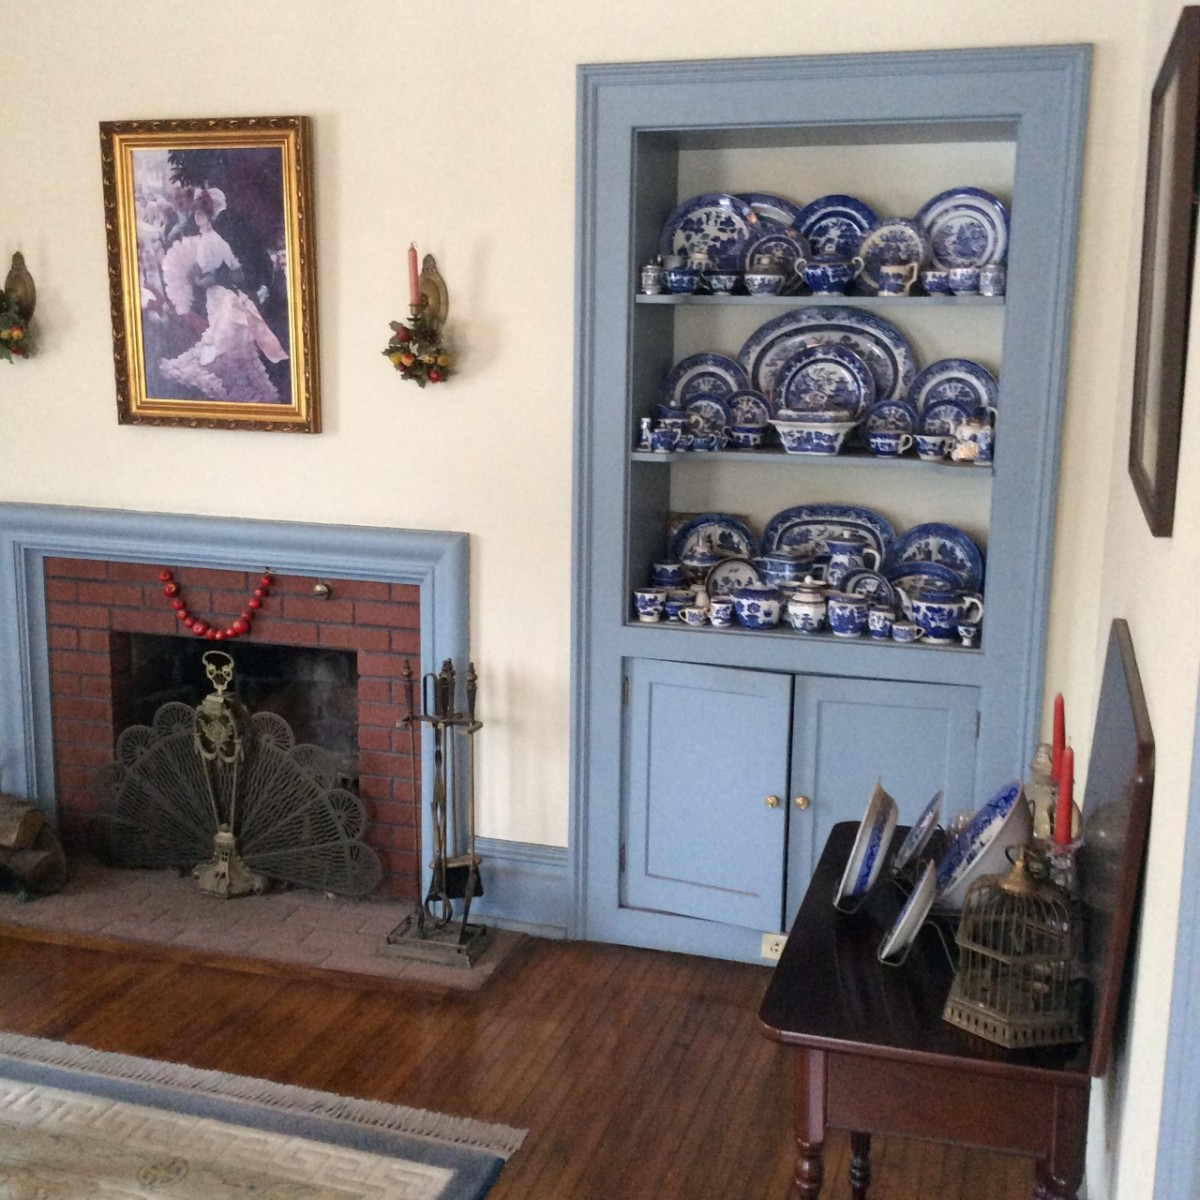 One of Mullikin’s first collections was Blue Willow china. “My house was built in 1863 and we restored it and stripped the woodwork and painted it a colonial Williamsburg blue,” she said.